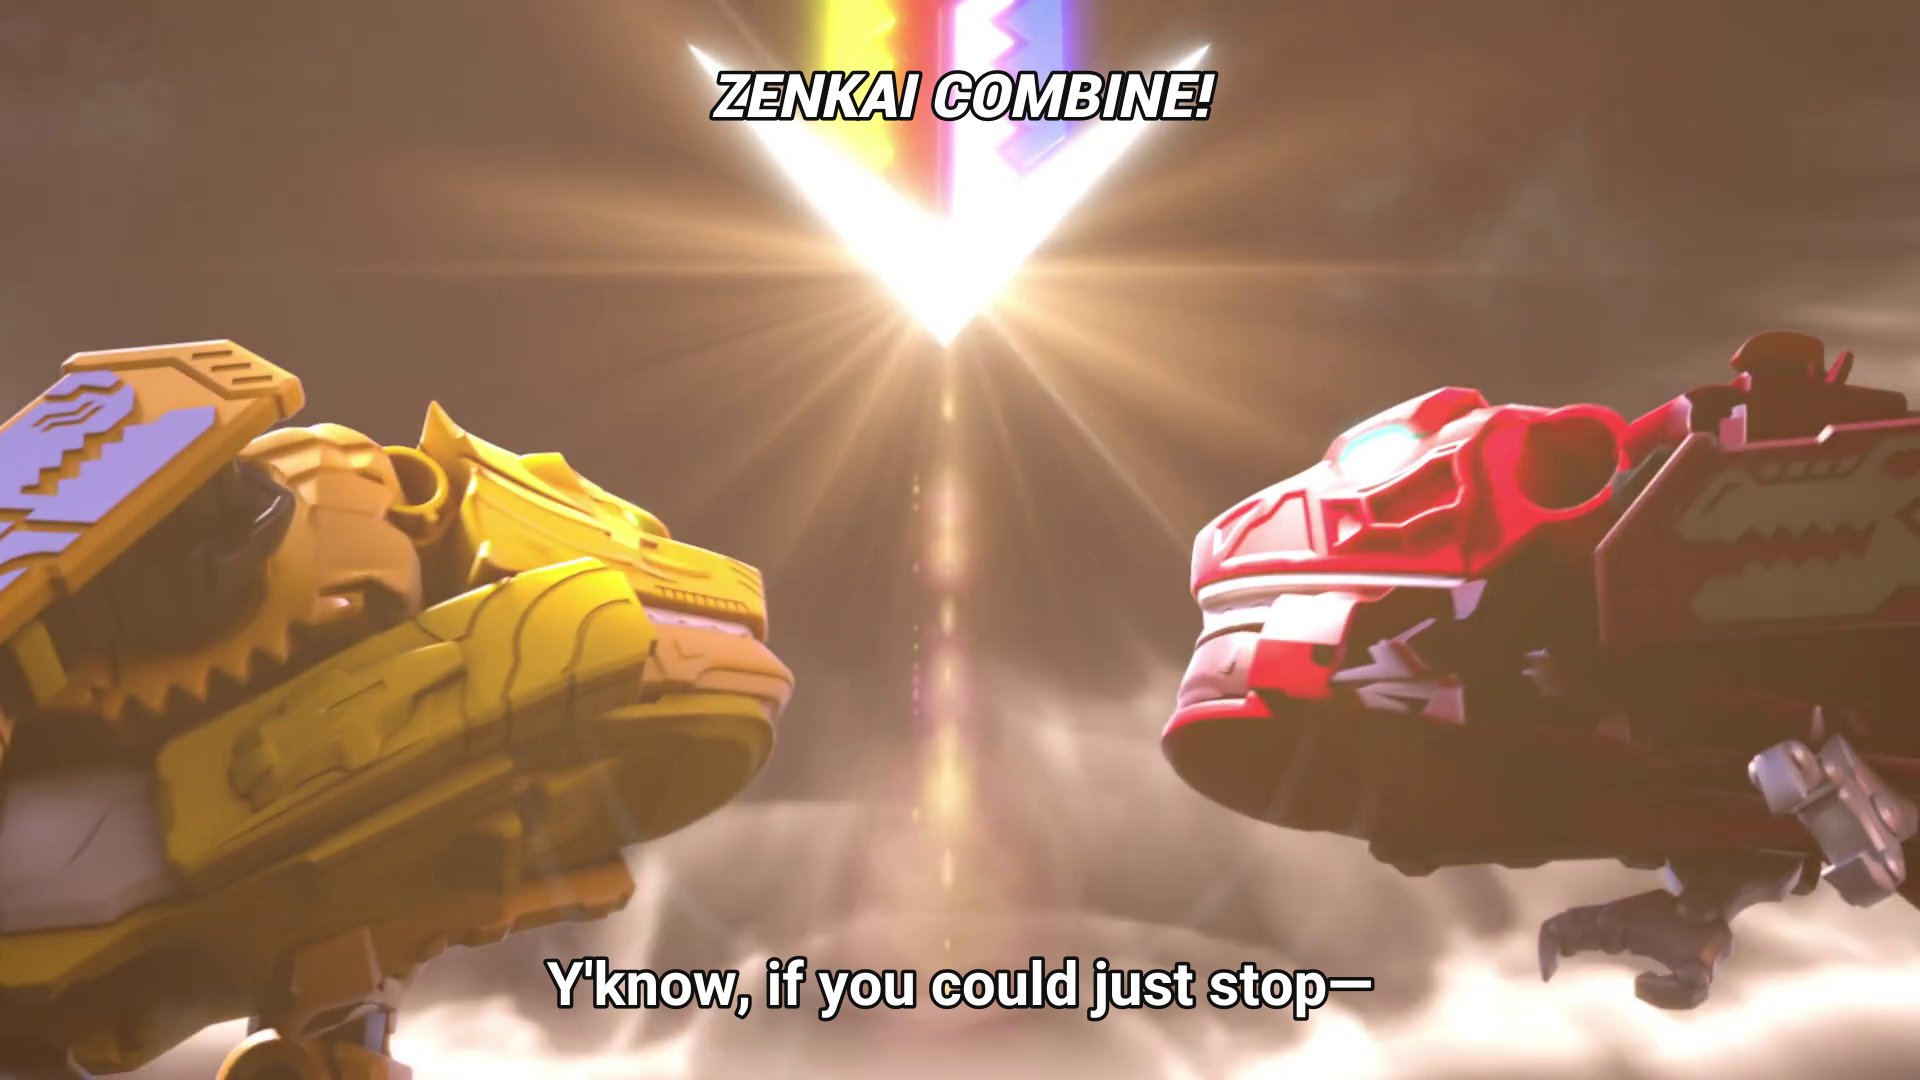 Gaon, robot form, which is a yellow cat, and Zyuran's robot form, a red t-rex.  Subtitles: Y'know, if you could just stop- ZENKAI COMBINE!